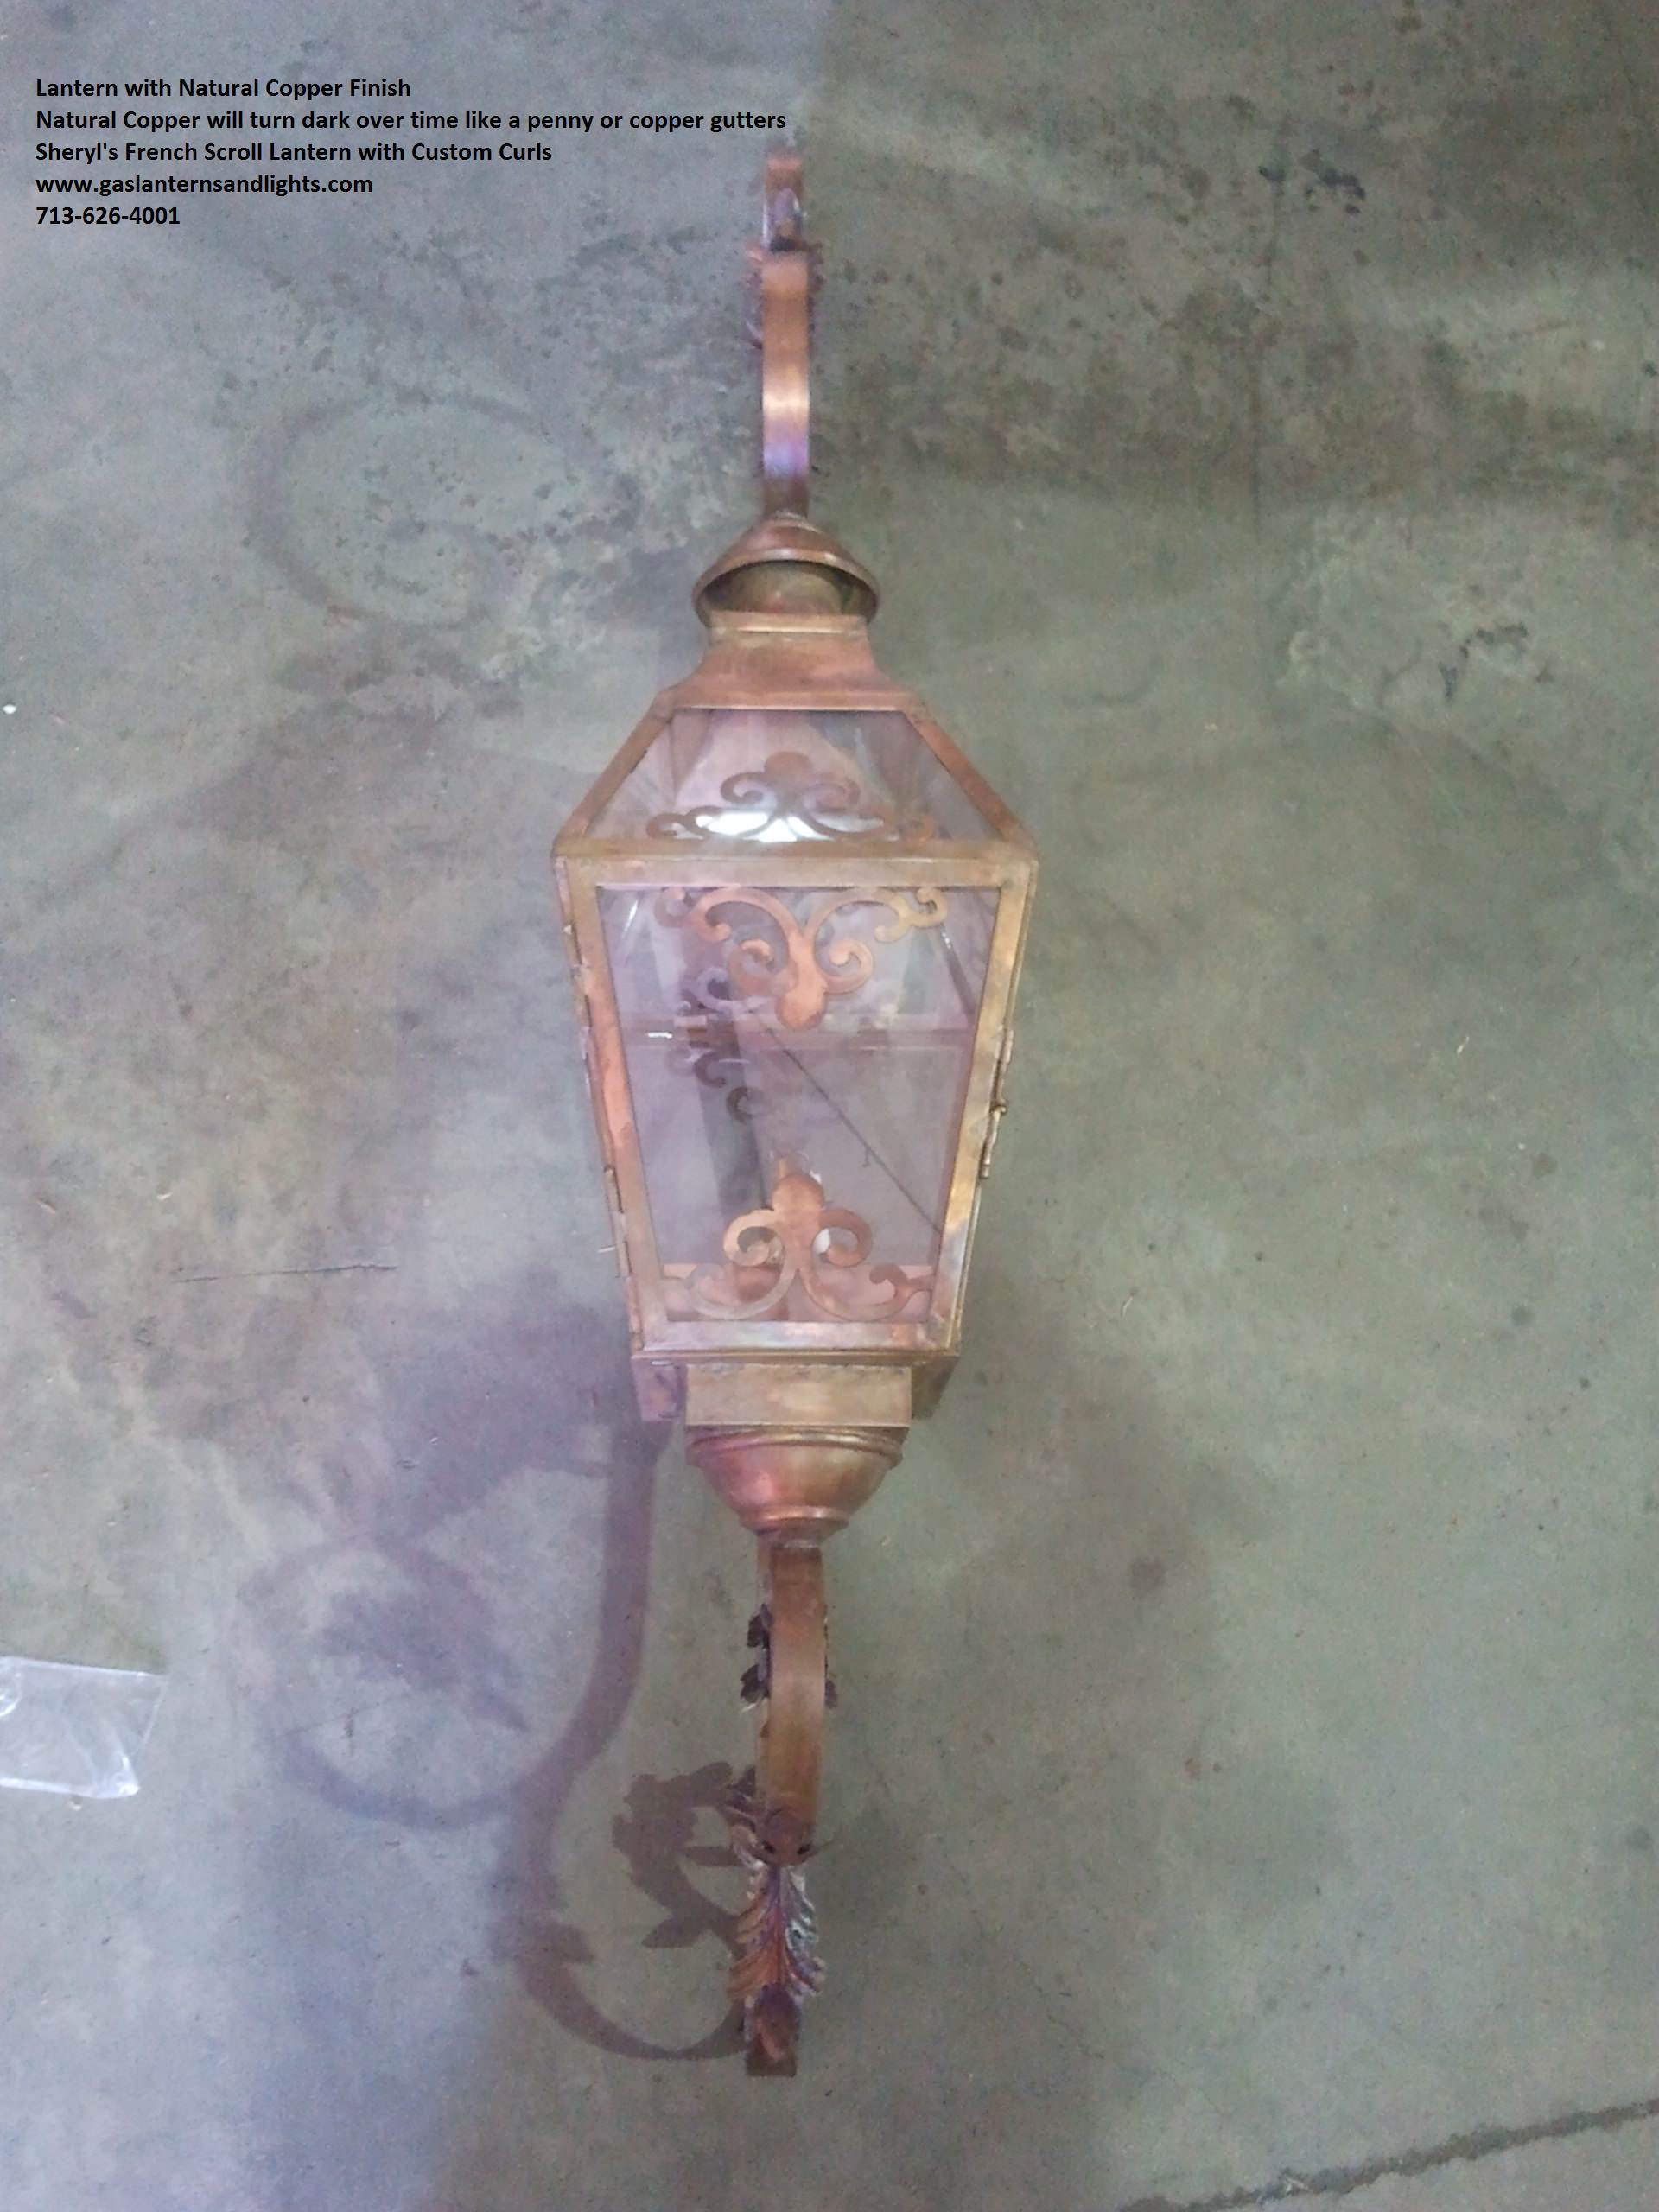 Natural Copper Finish on Sheryl's French Scroll Lantern